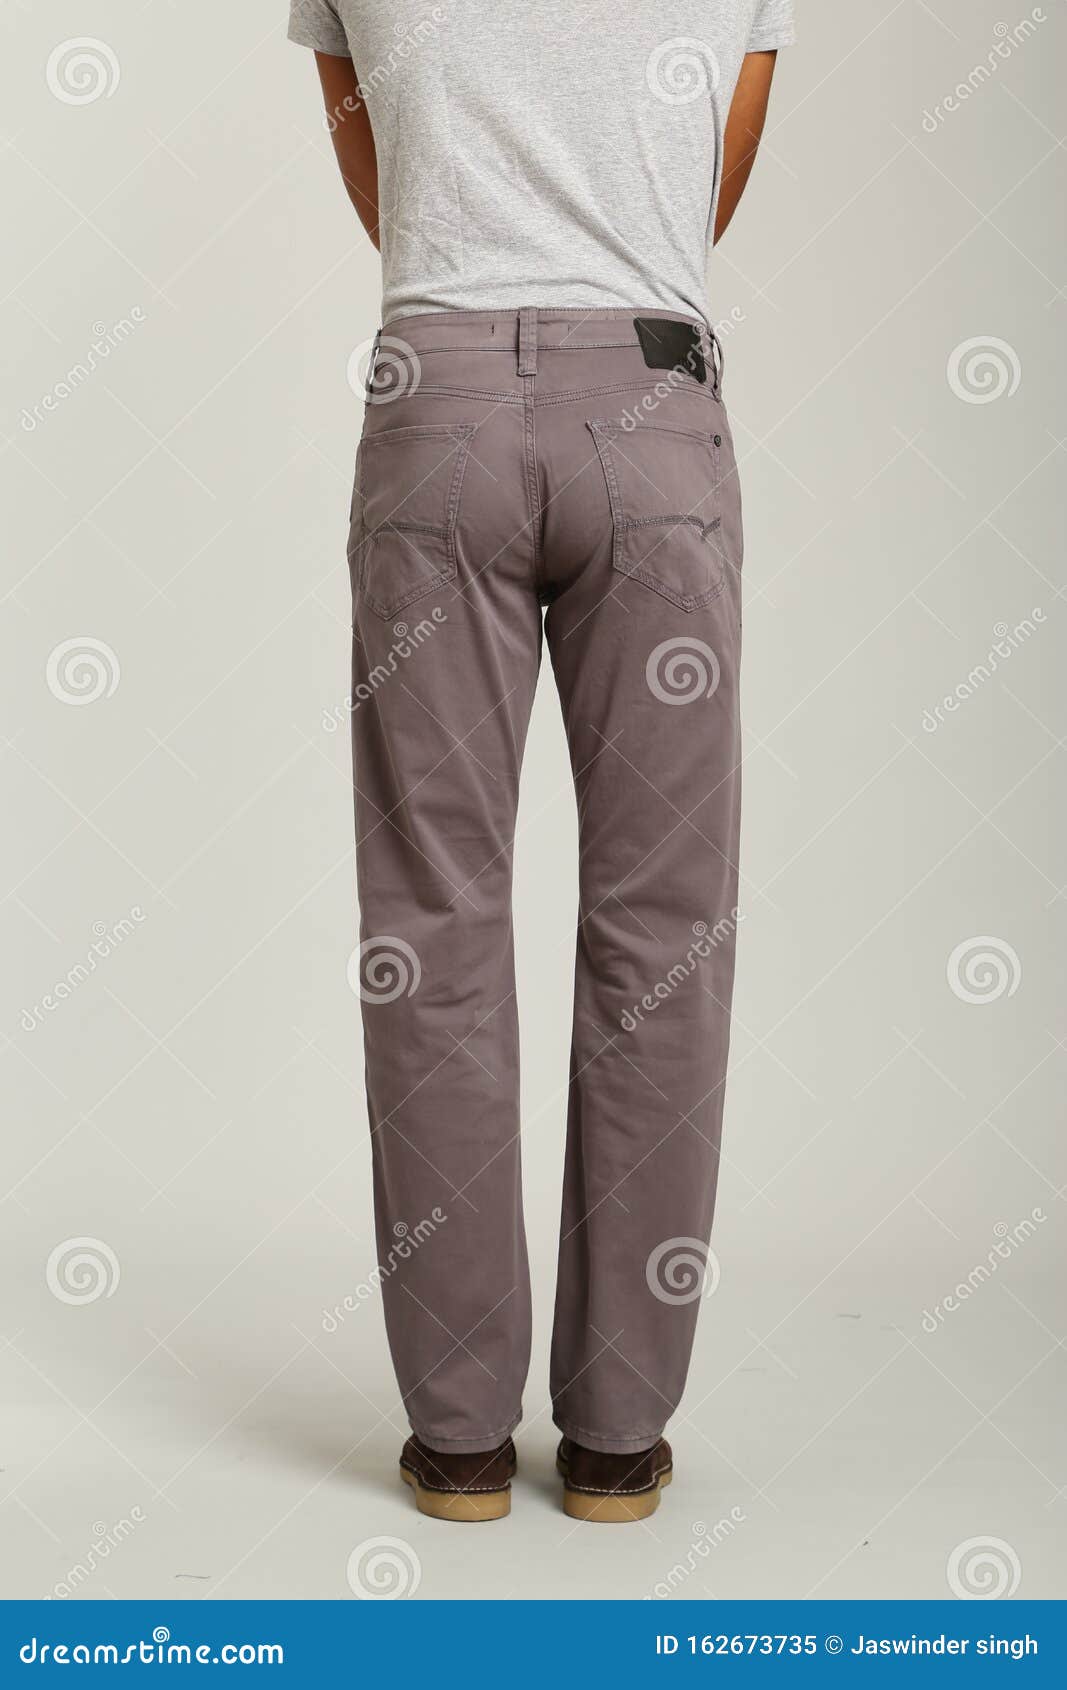 Men Light Brown, Black and Blue Comfort Fit Casual Trousers, Jeans in Party  Pants Warp Mid Wash with White Background Stock Photo - Image of dress,  hipster: 162673778